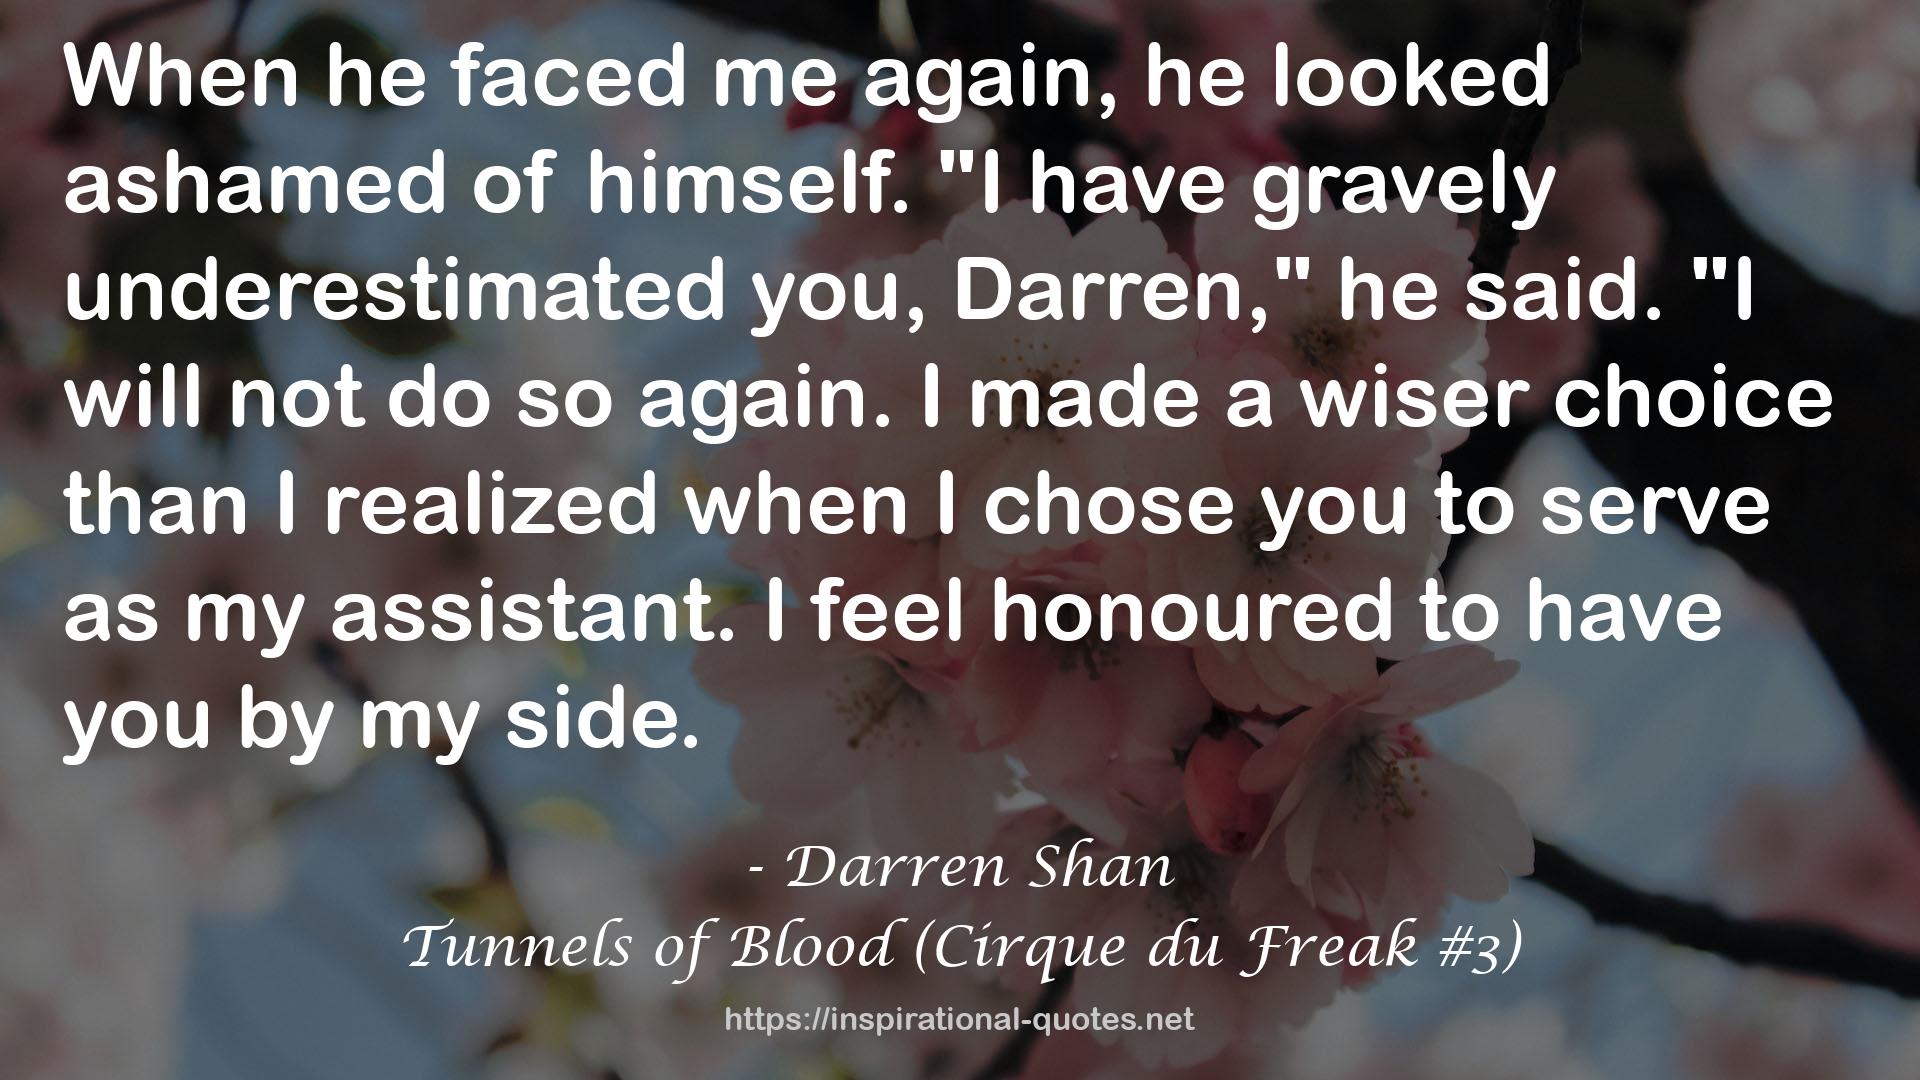 Tunnels of Blood (Cirque du Freak #3) QUOTES